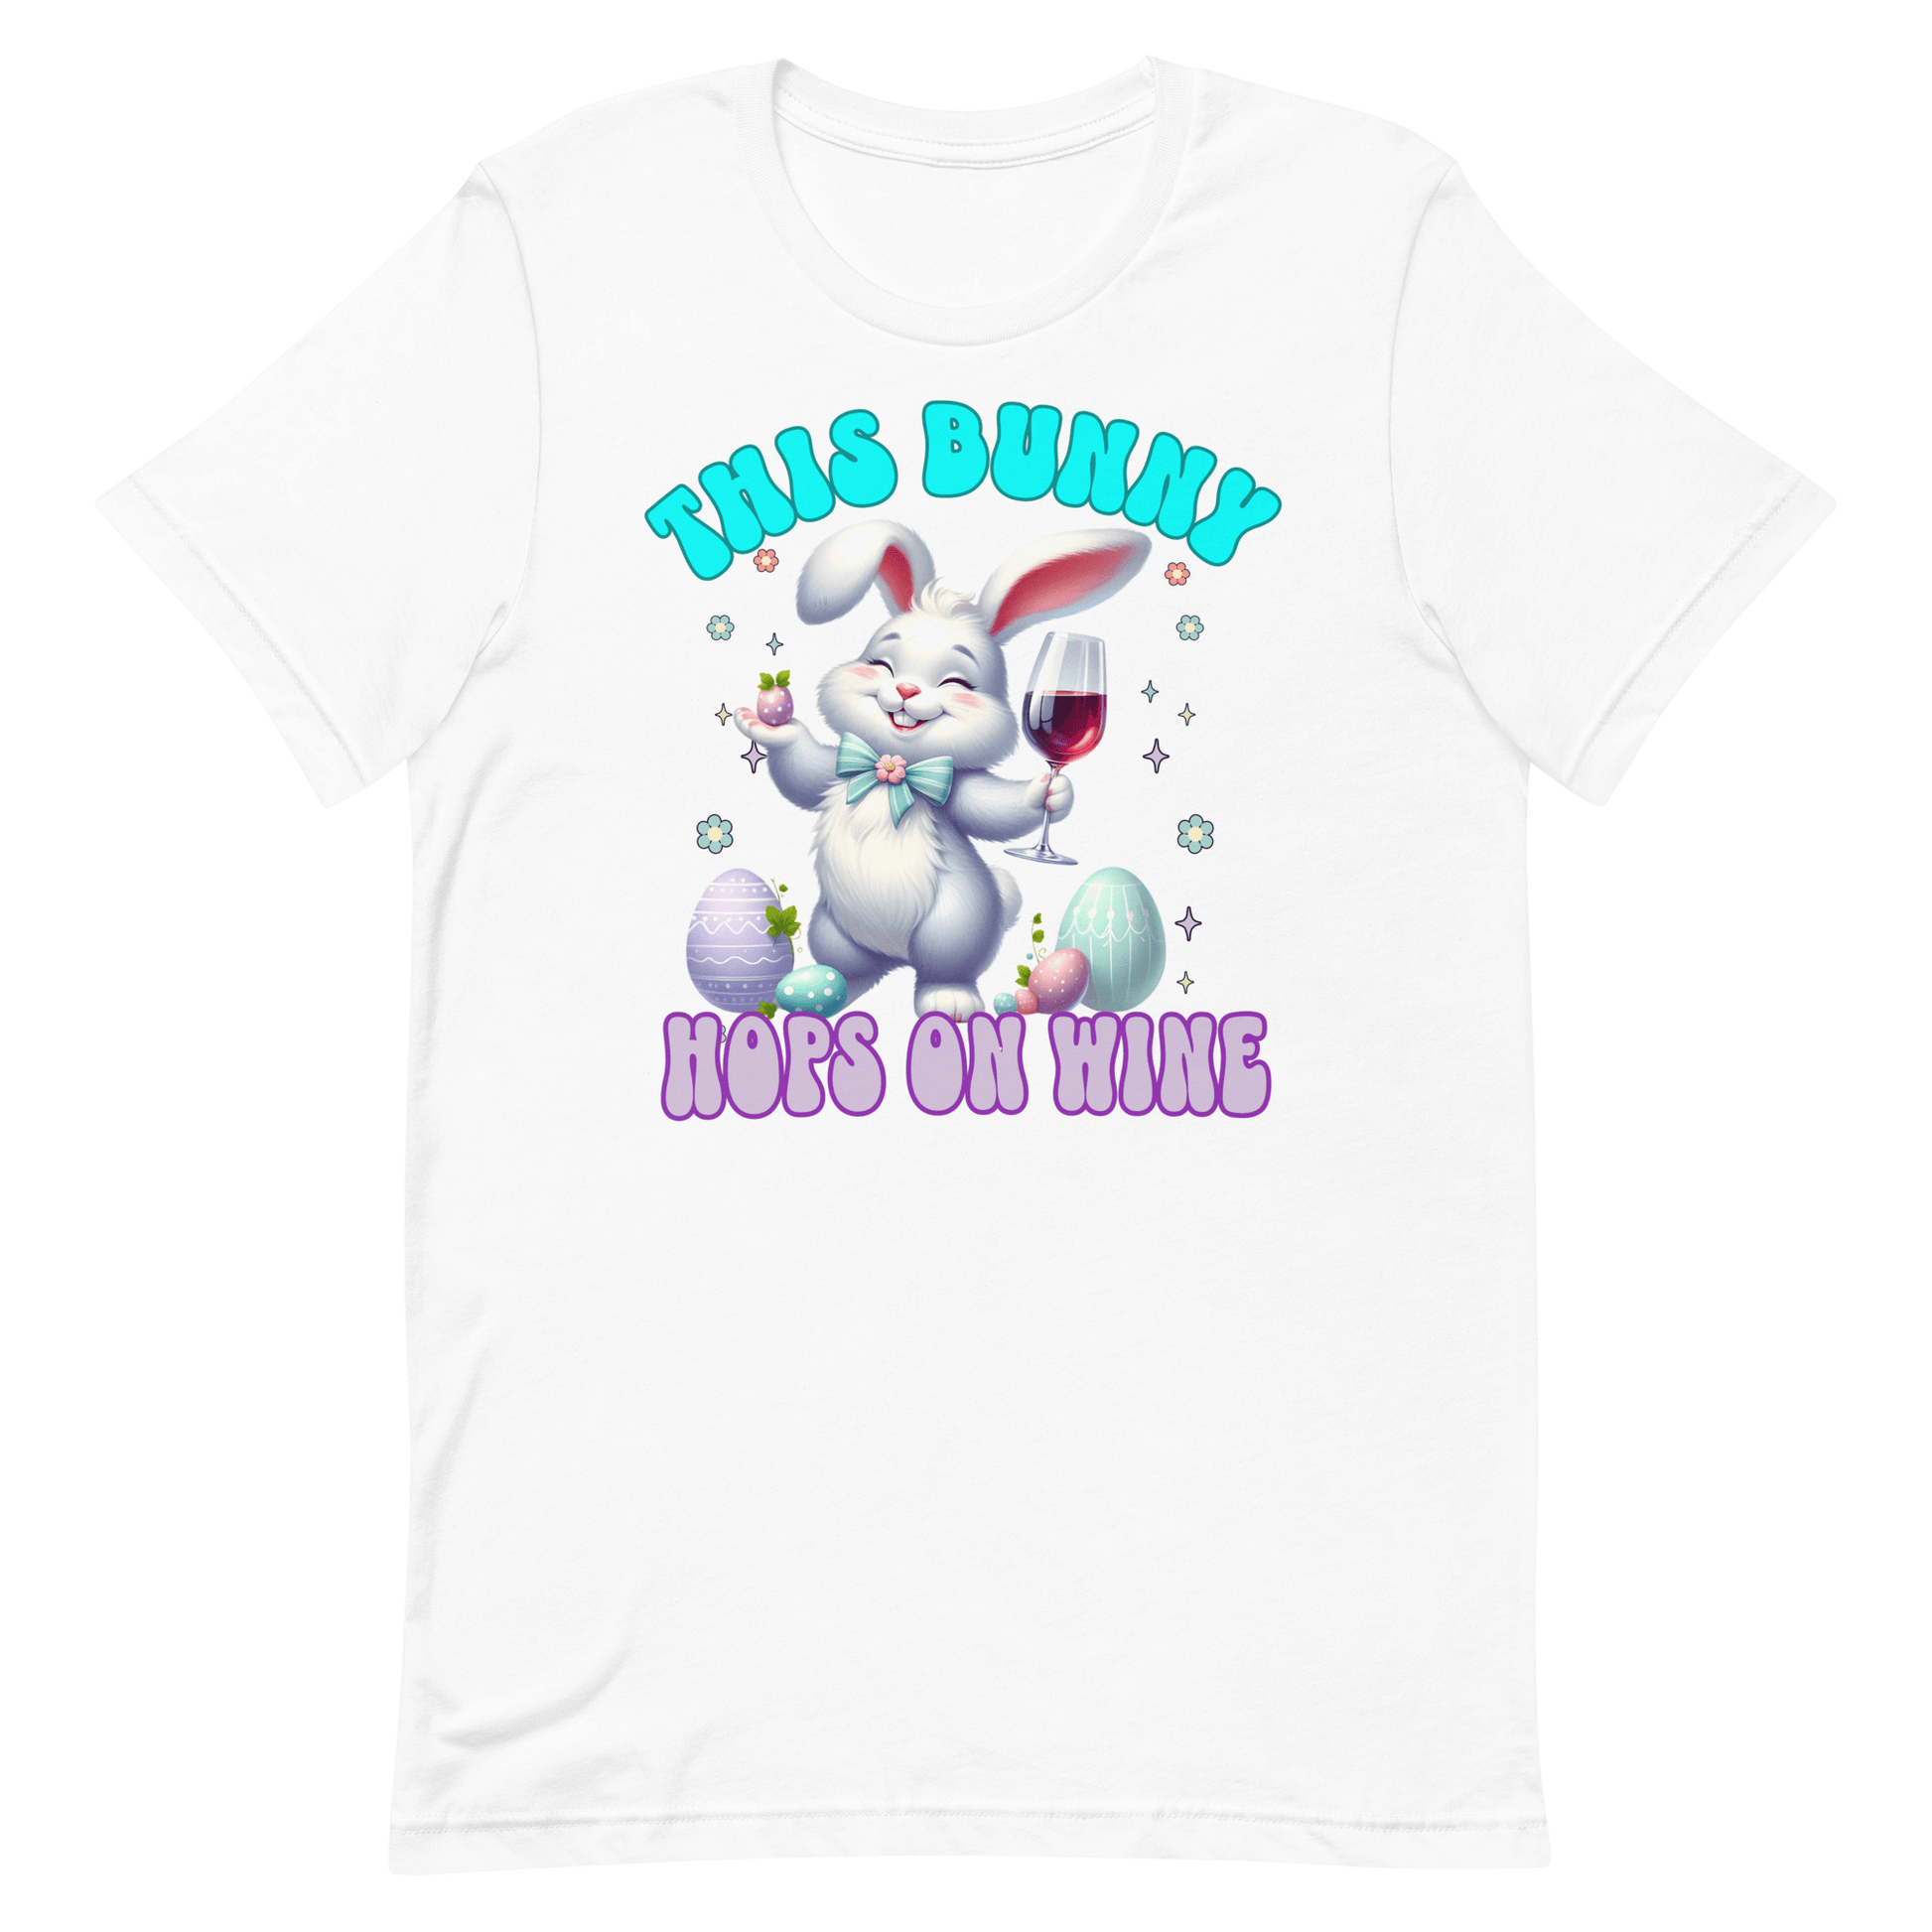 This Bunny Hops On Wine Tee